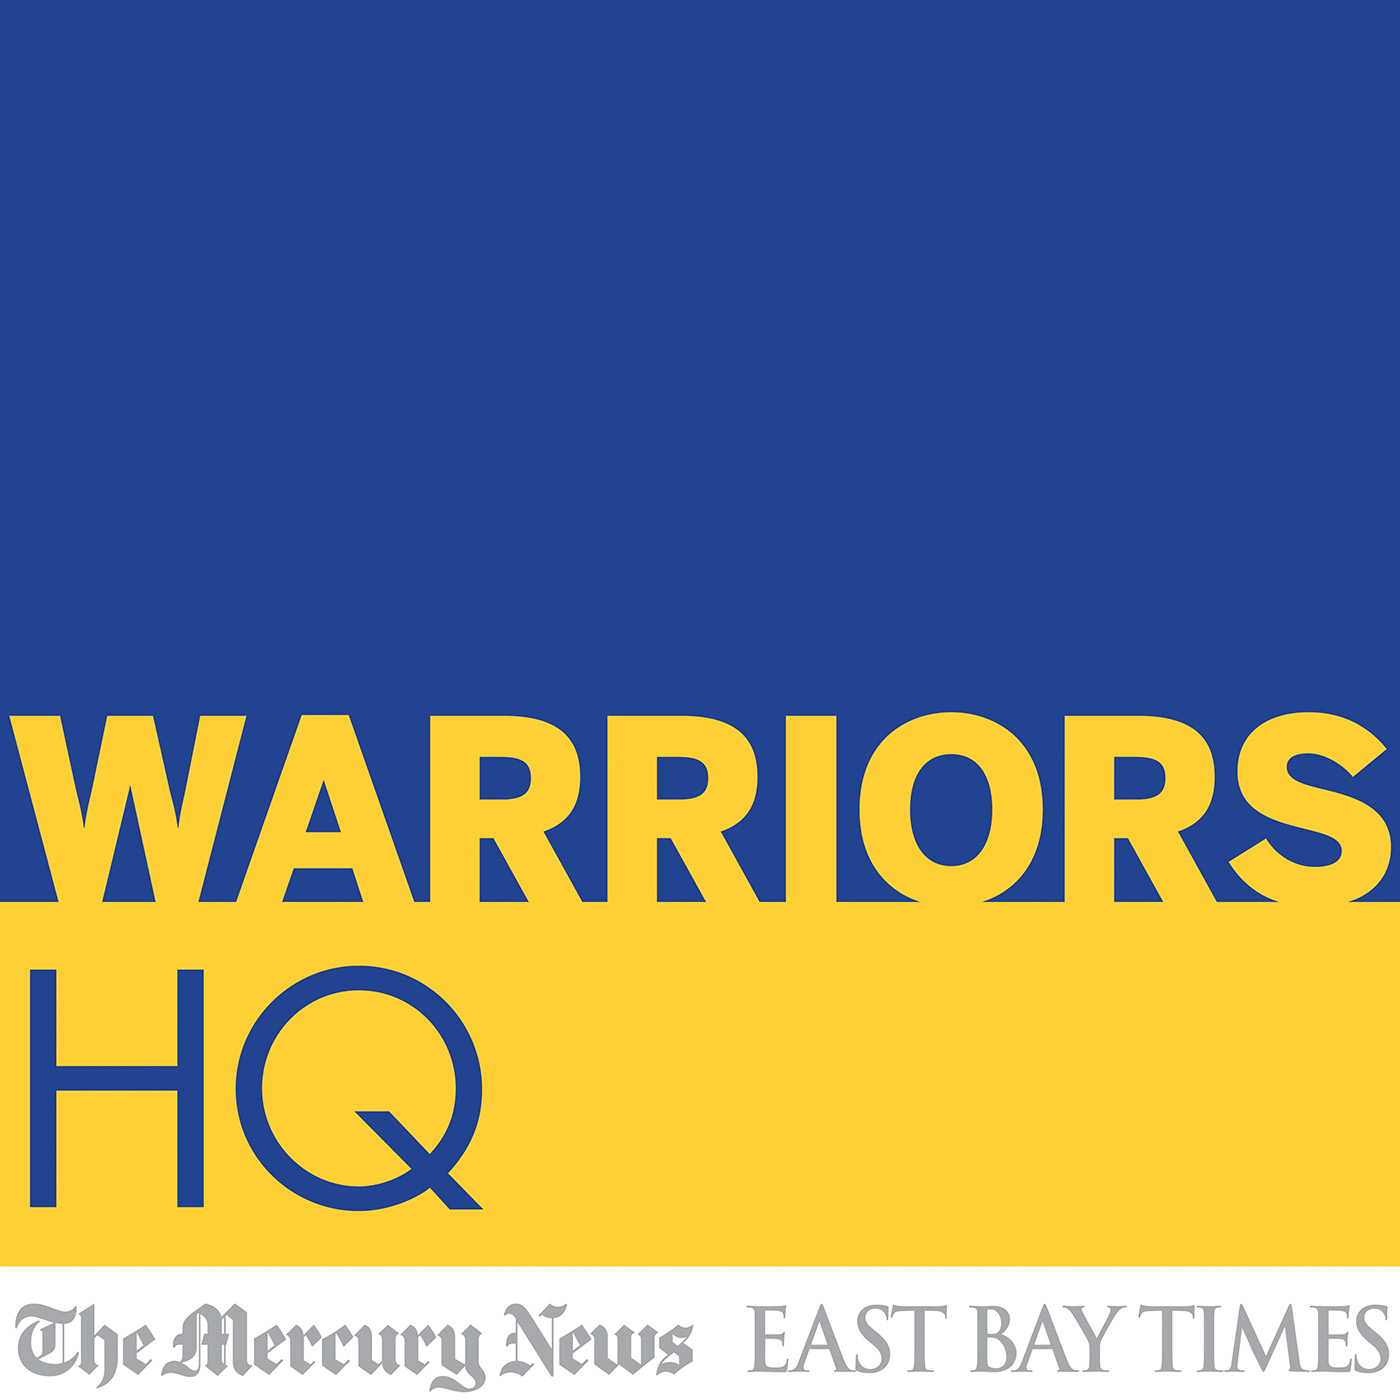 Not tough enough Warriors lose Game 4 to Rockets